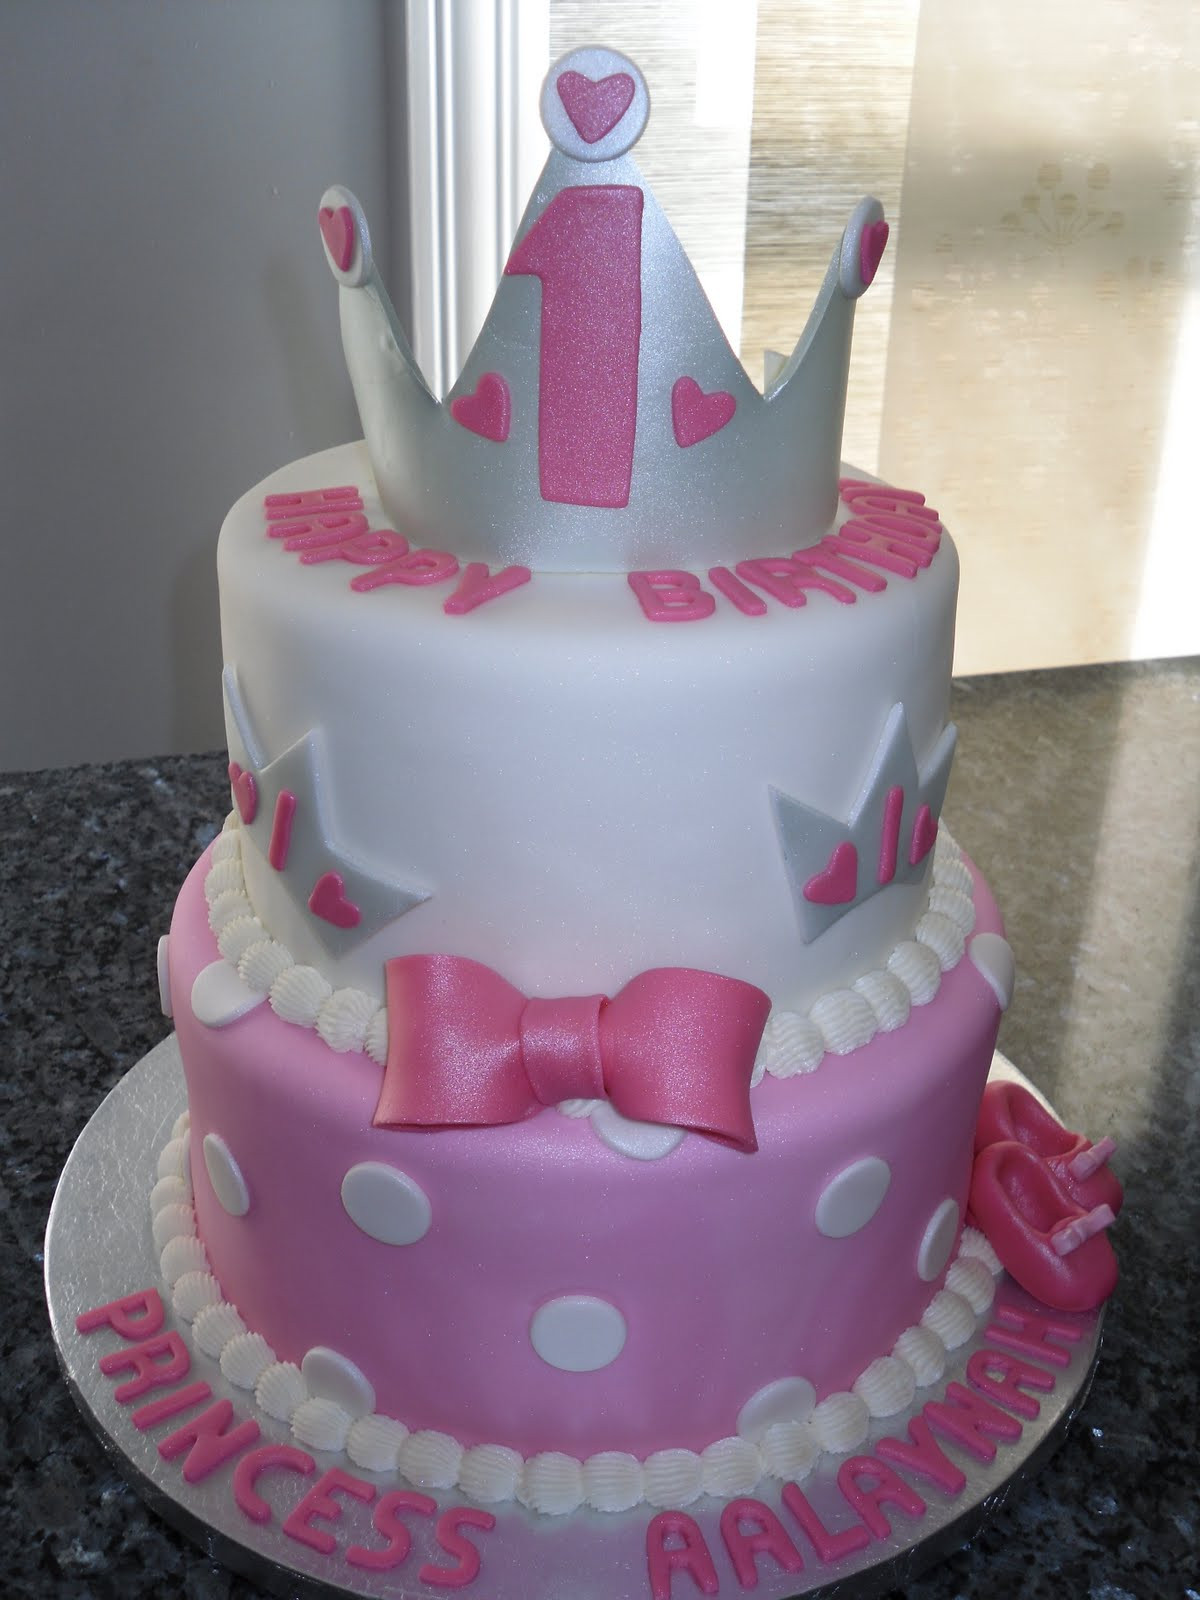 Birthday Cake For 1 Year Old
 Carat Cakes Two Very Special e Year Old Birthdays